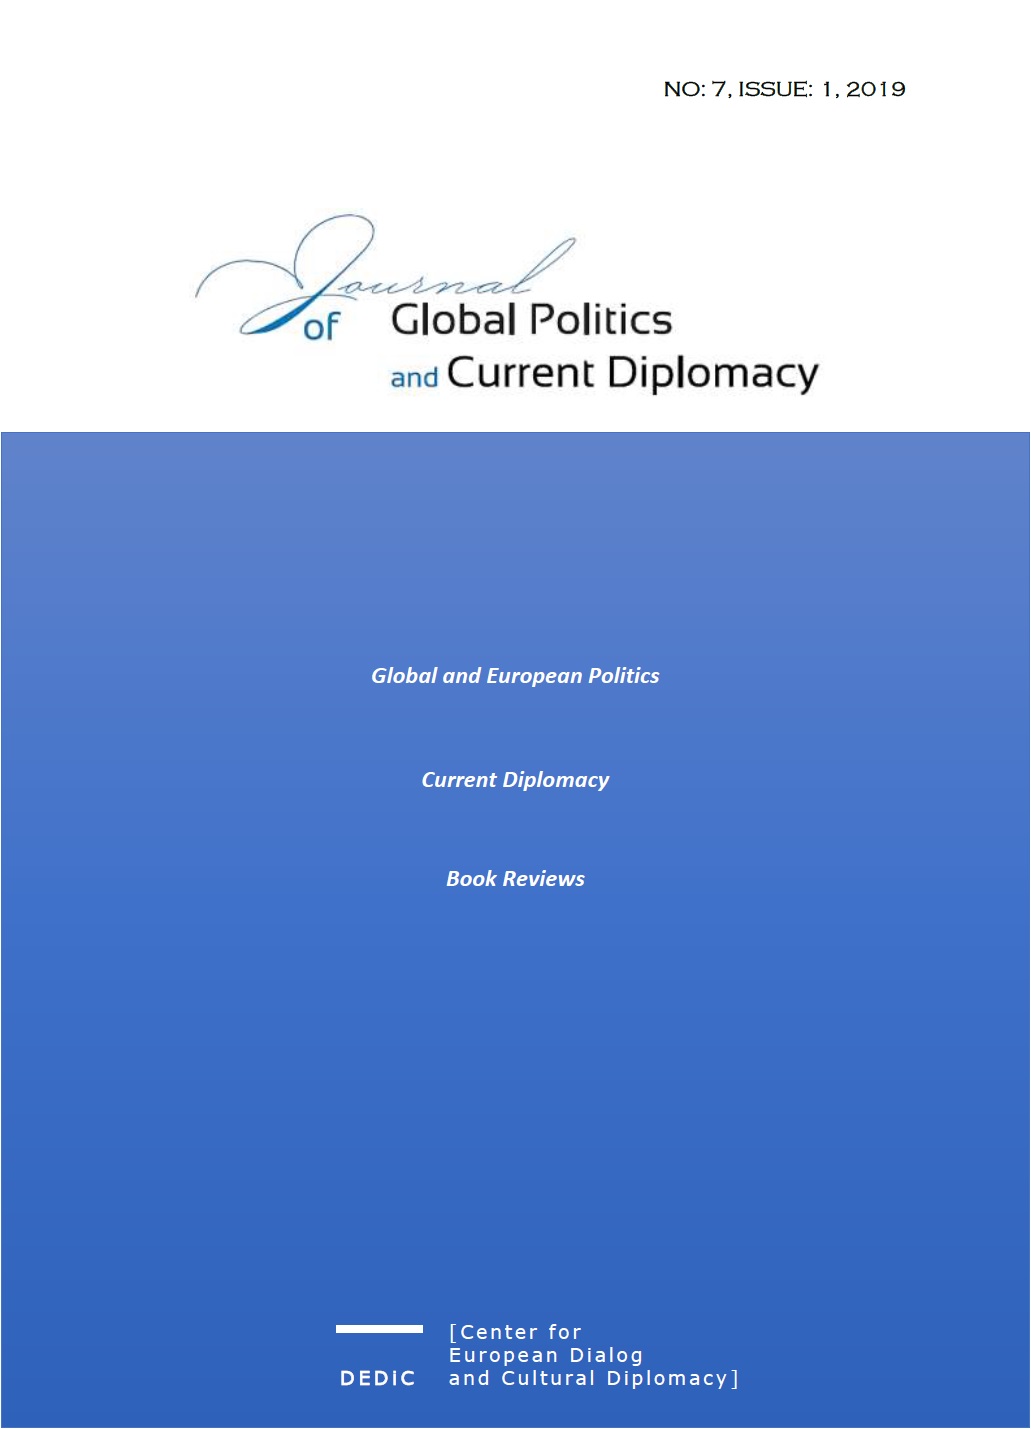 Book Review: Nicolas Badalassi and Sarah B. Snyder (edited by), The CSCE and the End of the Cold War. Diplomacy, Societies and Human Rights. 1972-1990. New York, Oxford: Berghahn, 2019.